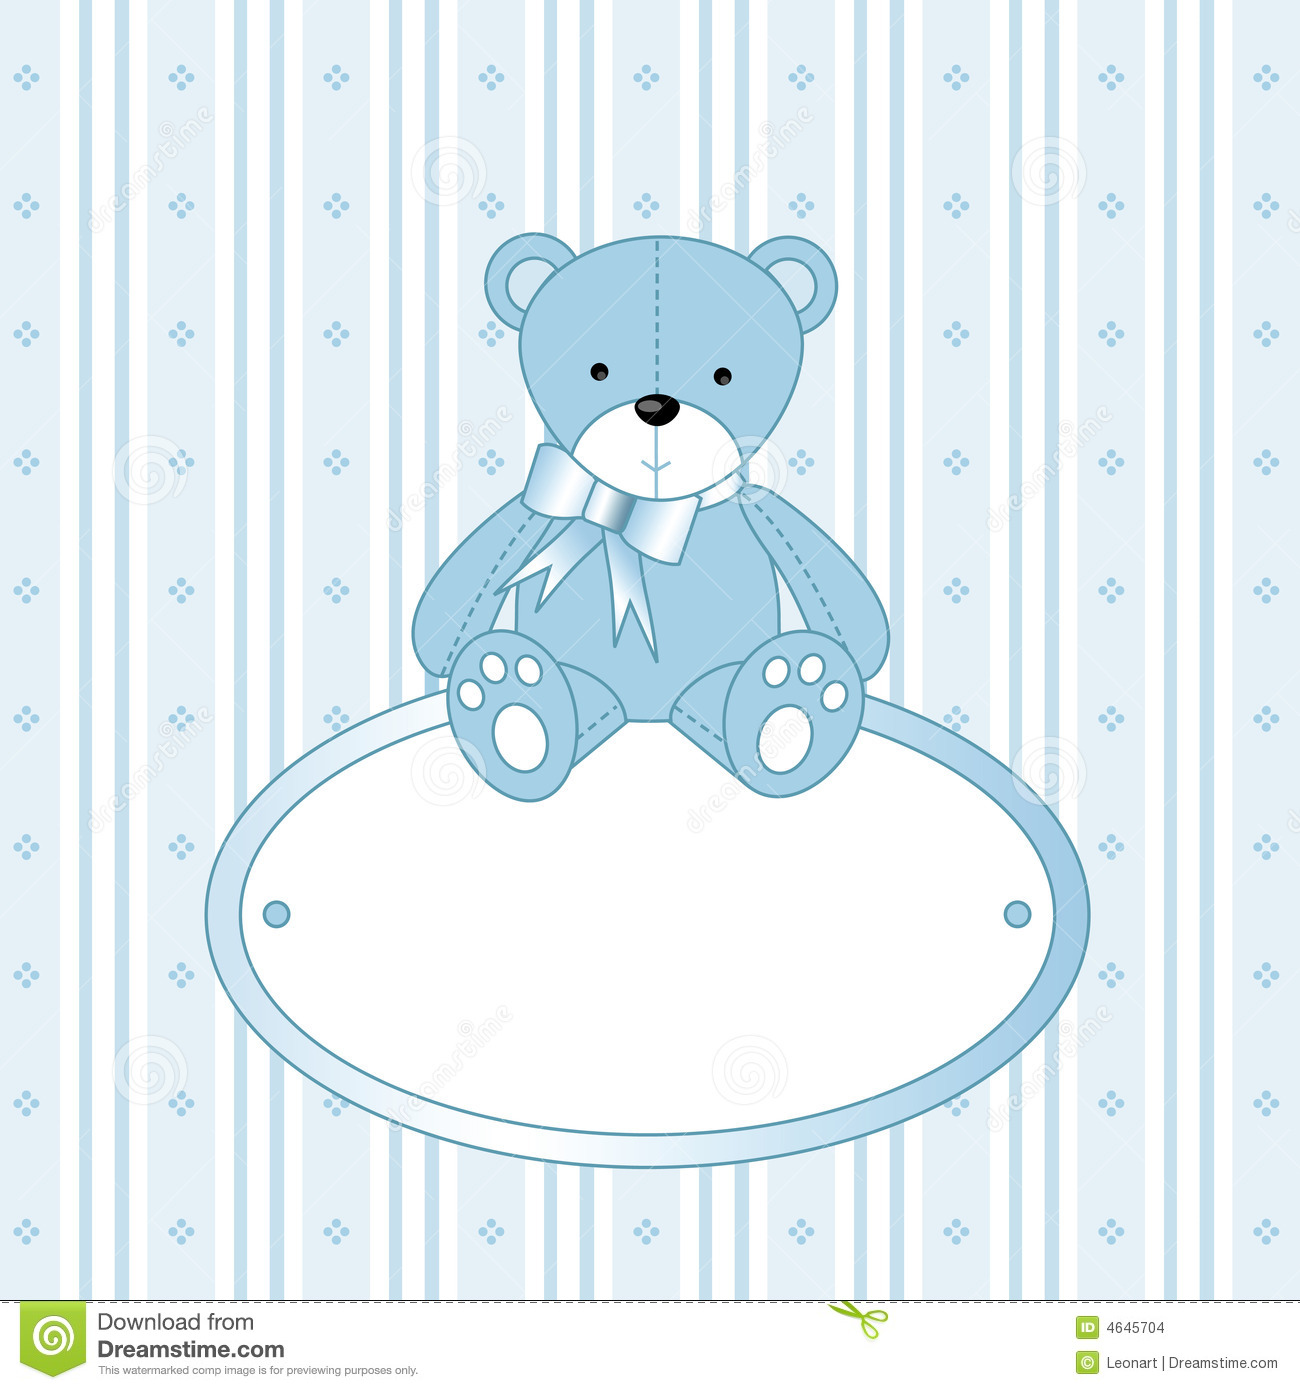 Teddy Bear For Baby Boy Stock Images   Image  4645704